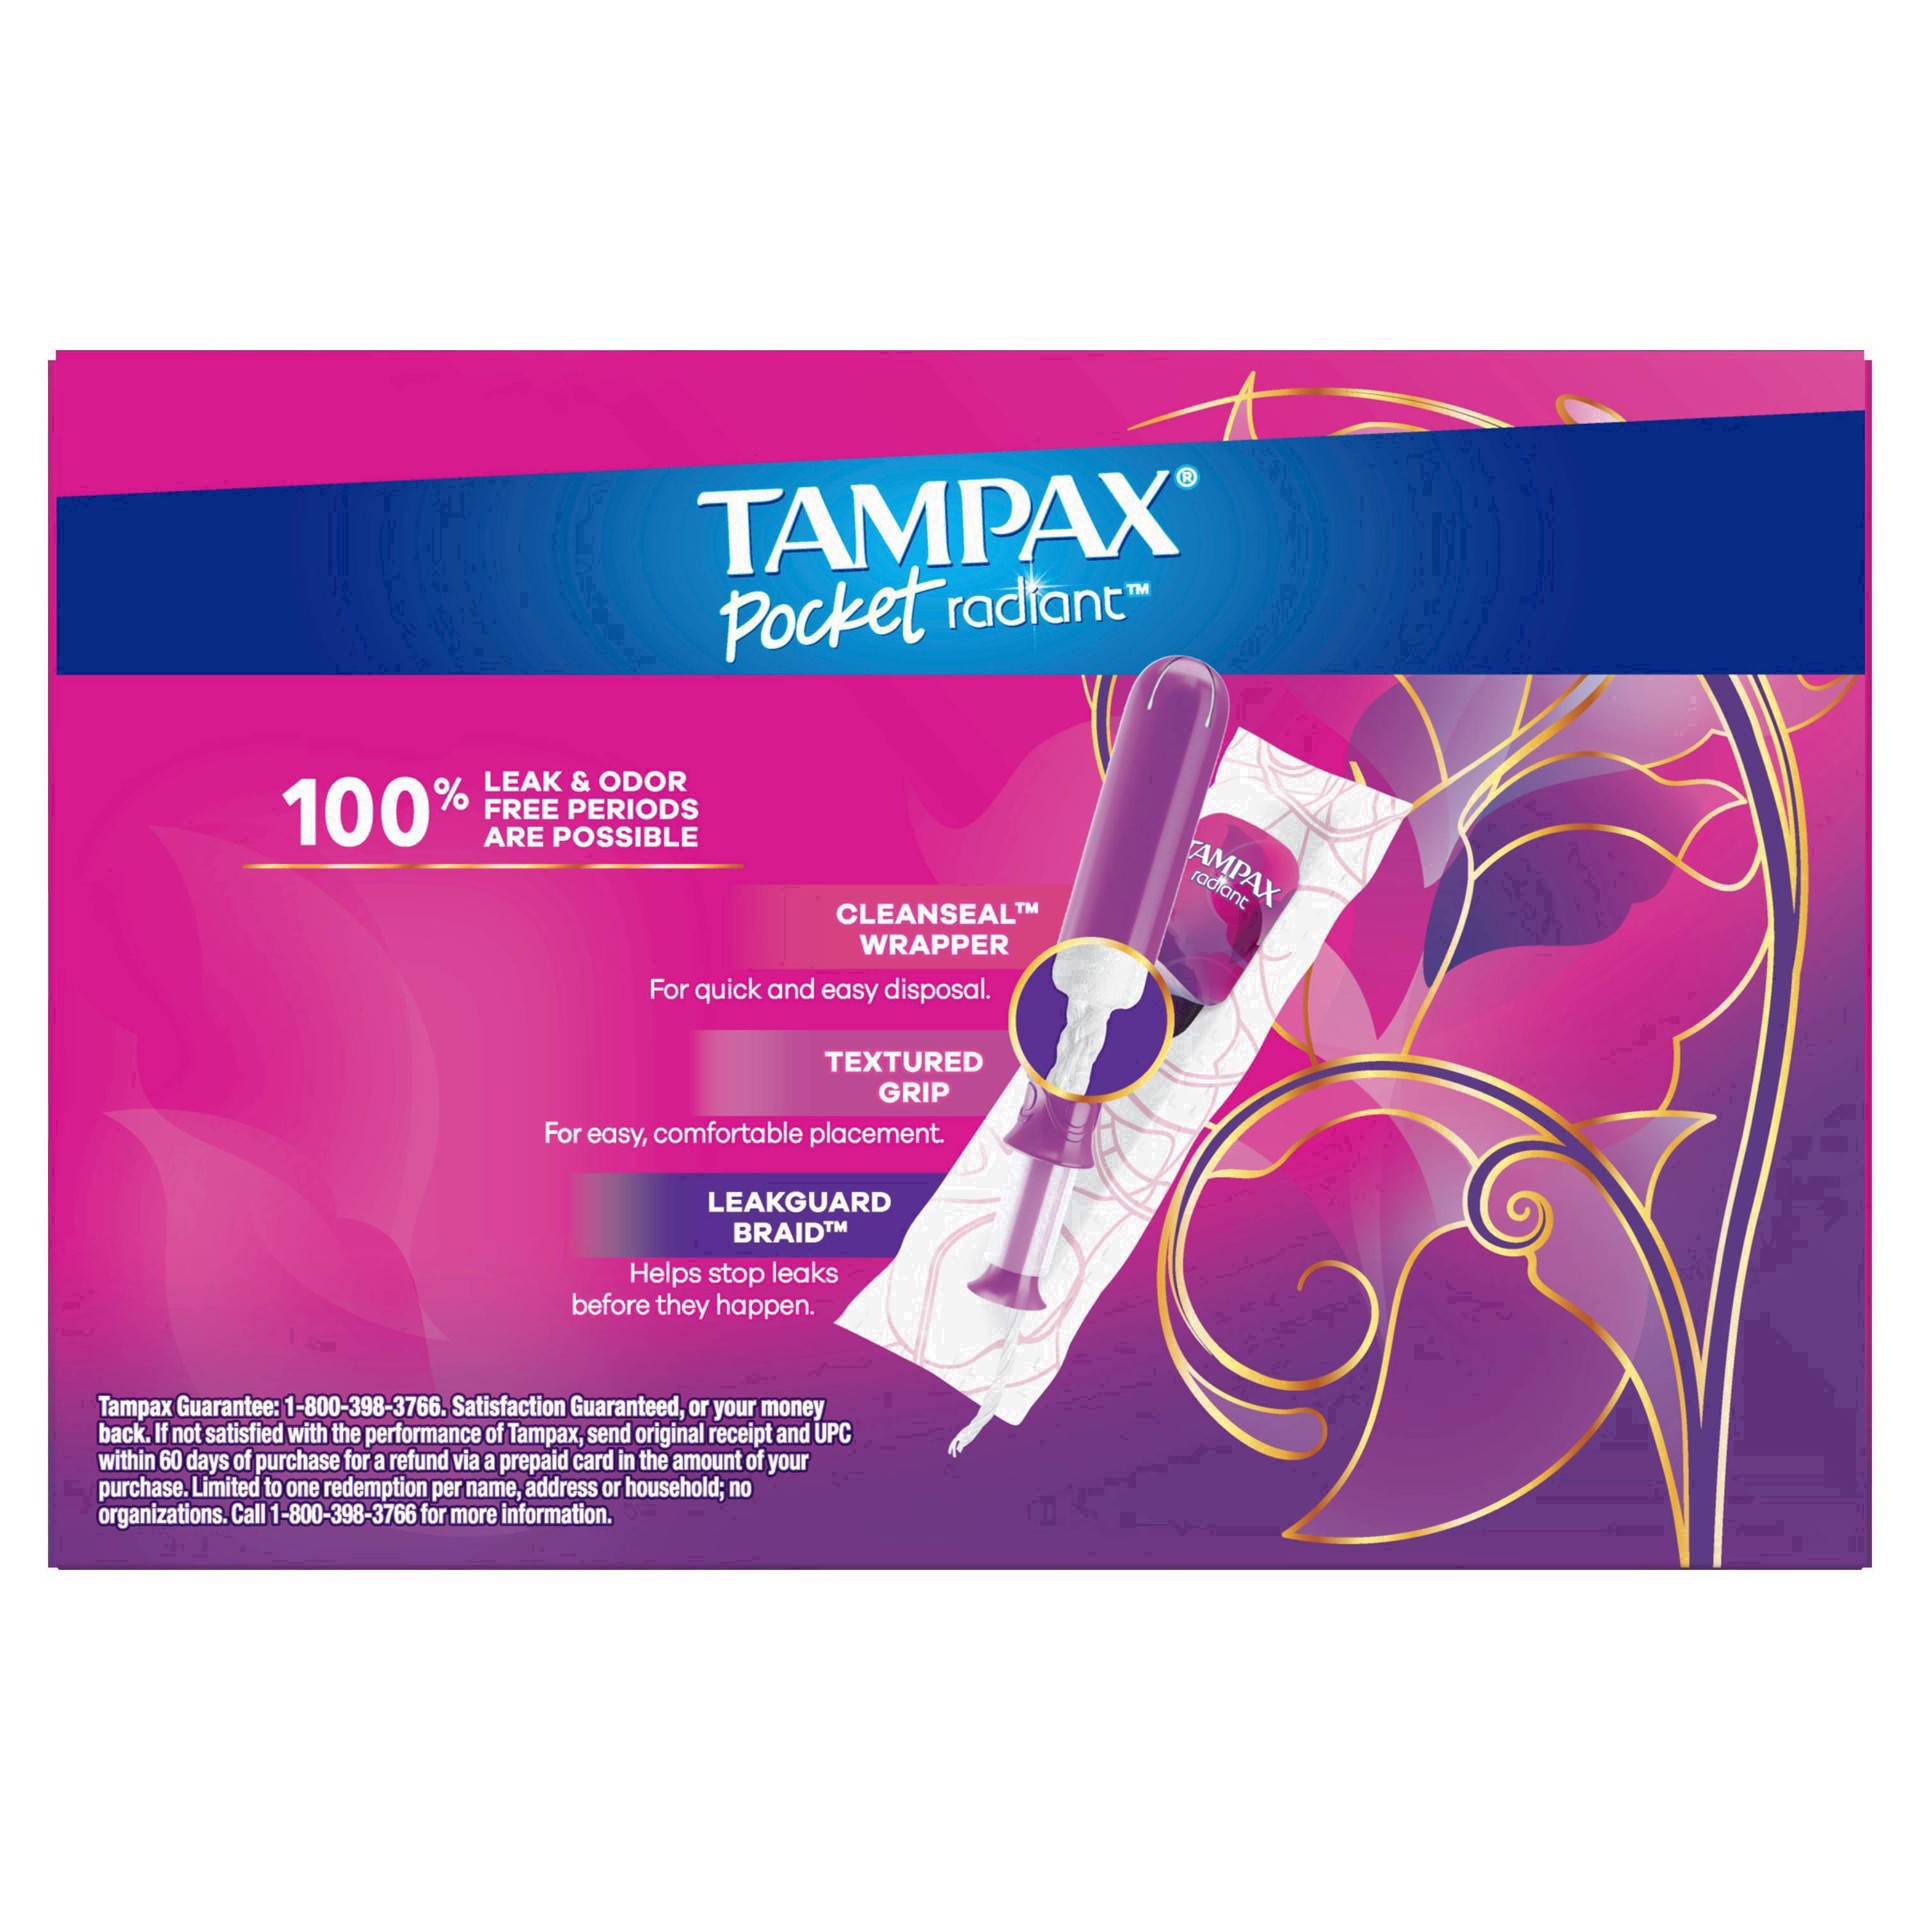 slide 30 of 94, Tampax Pocket Radiant Compact Plastic Tampons, With LeakGuard Braid, Super Absorbency, Unscented, 28 Count, 28 ct